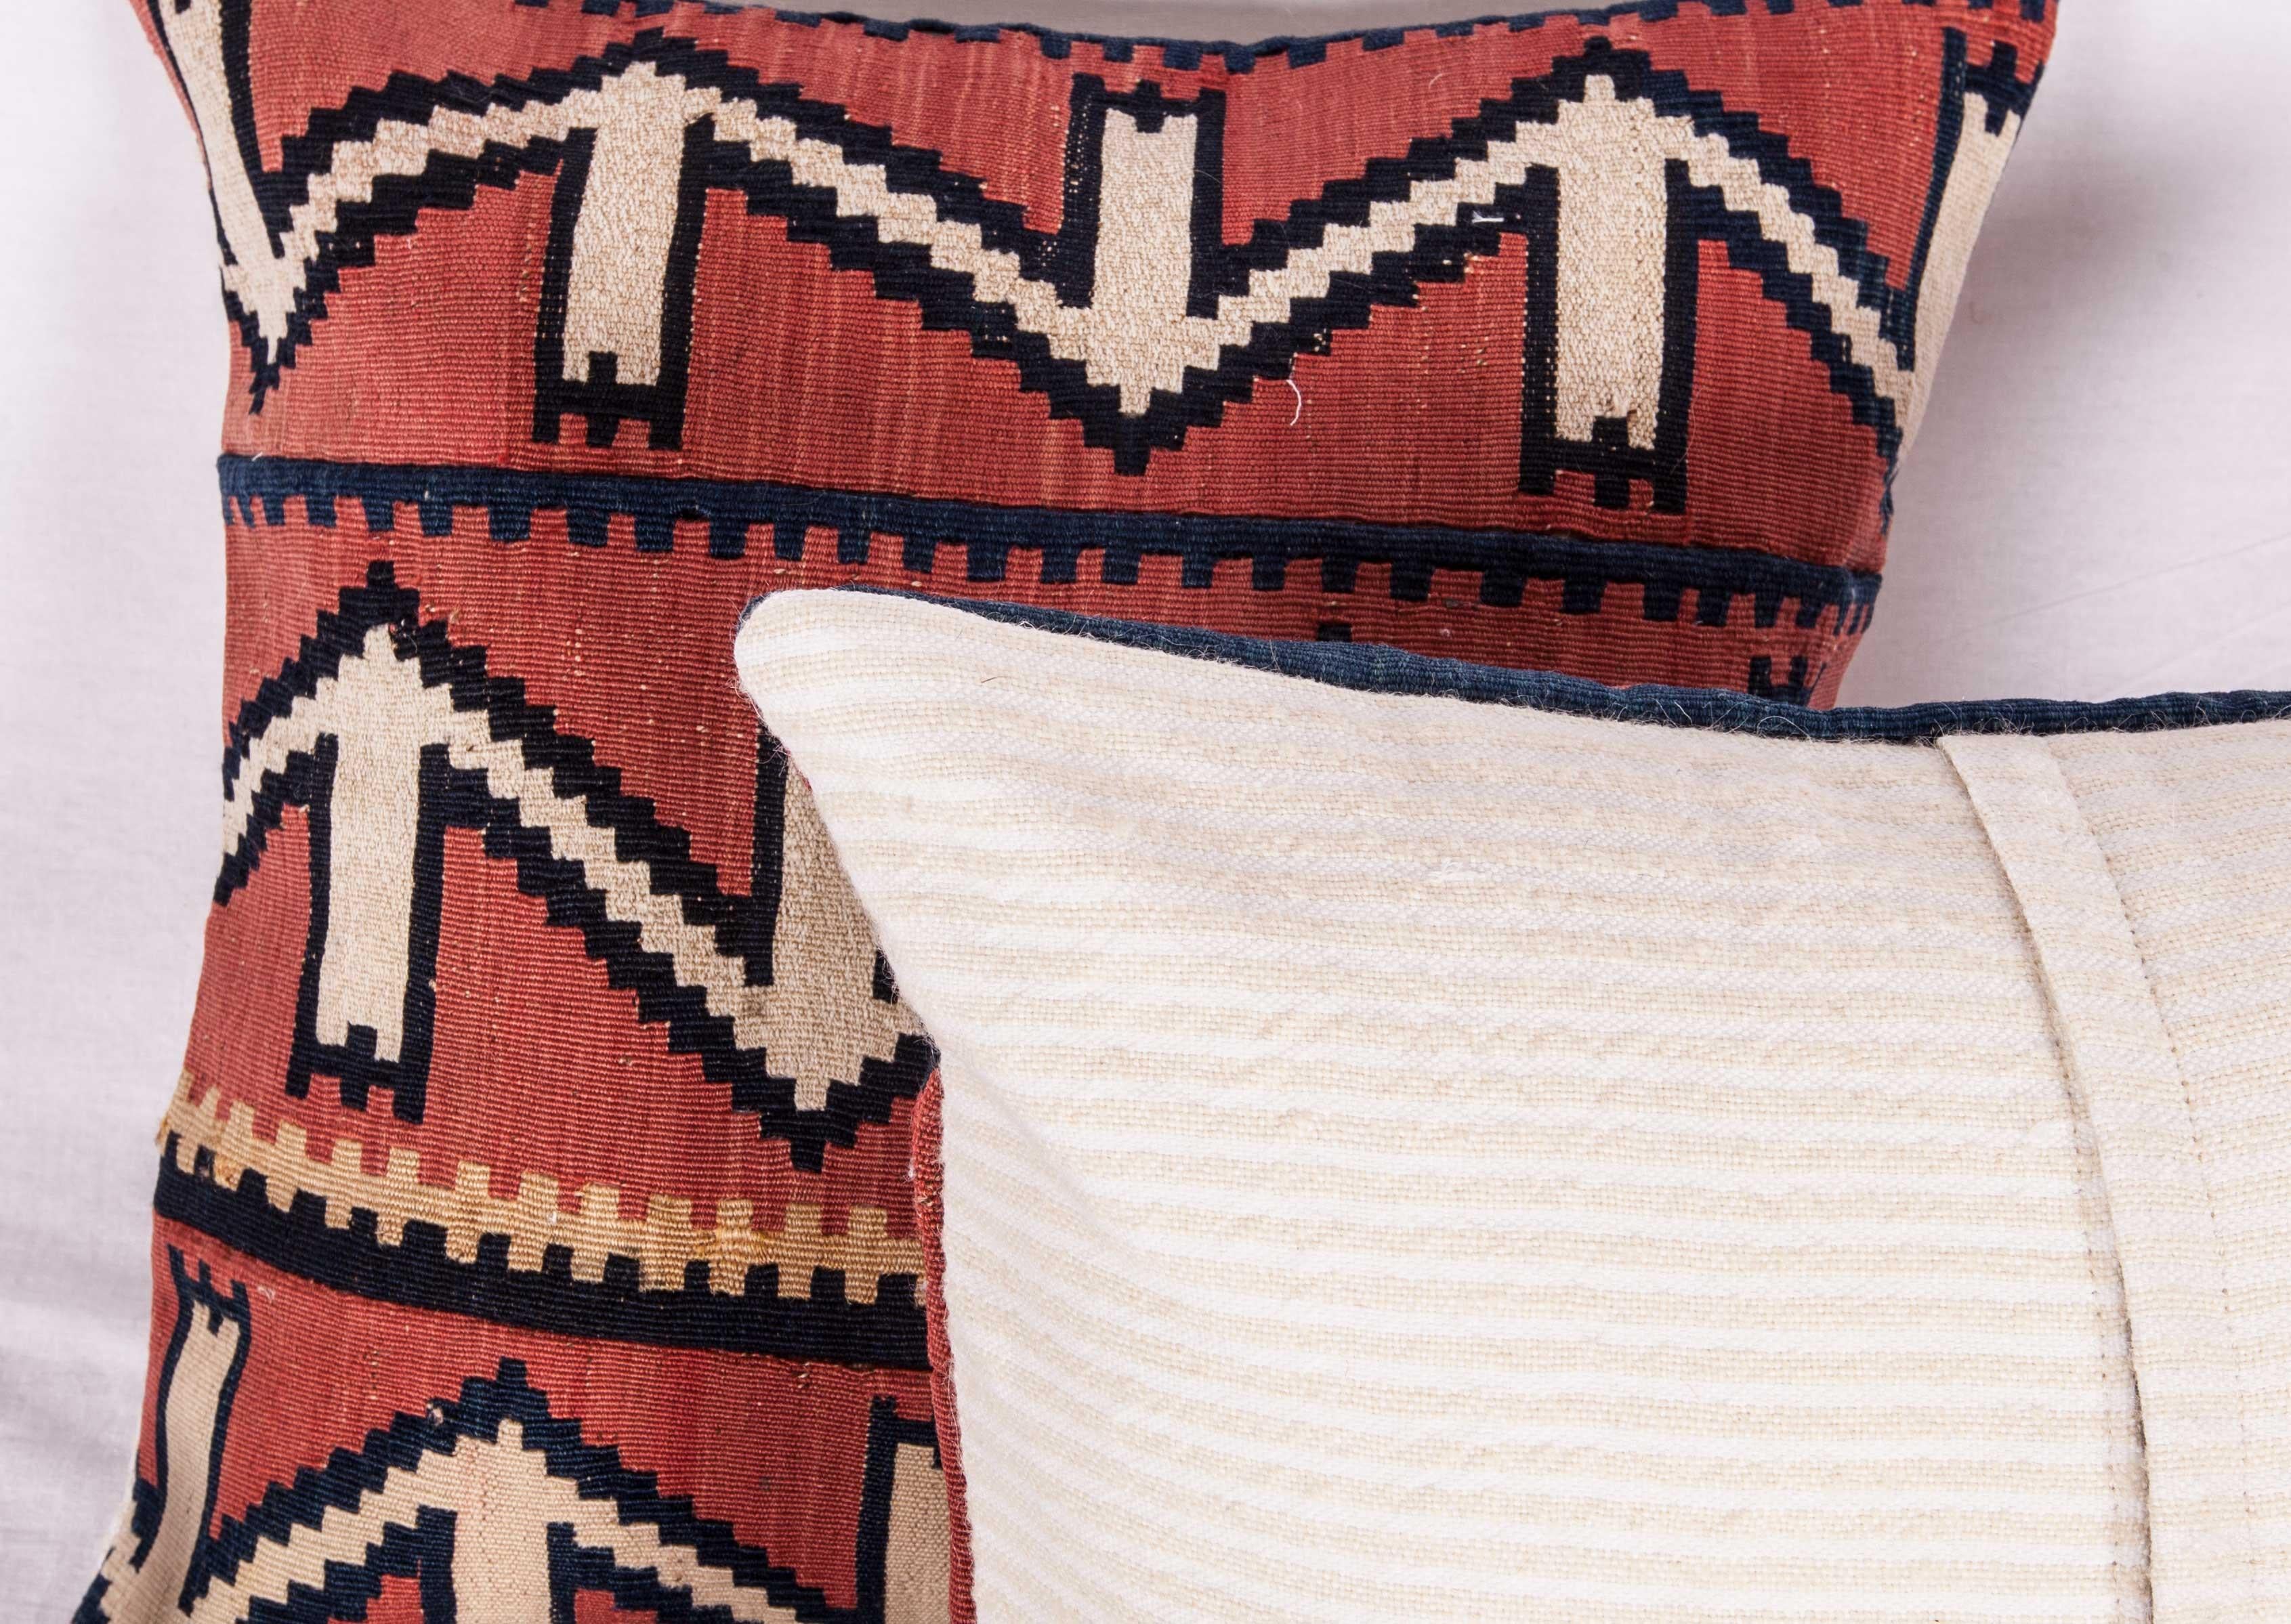 Hand-Woven Pillow / Cushion Covers Made from an Antique Kuba Kilim, 19th Century